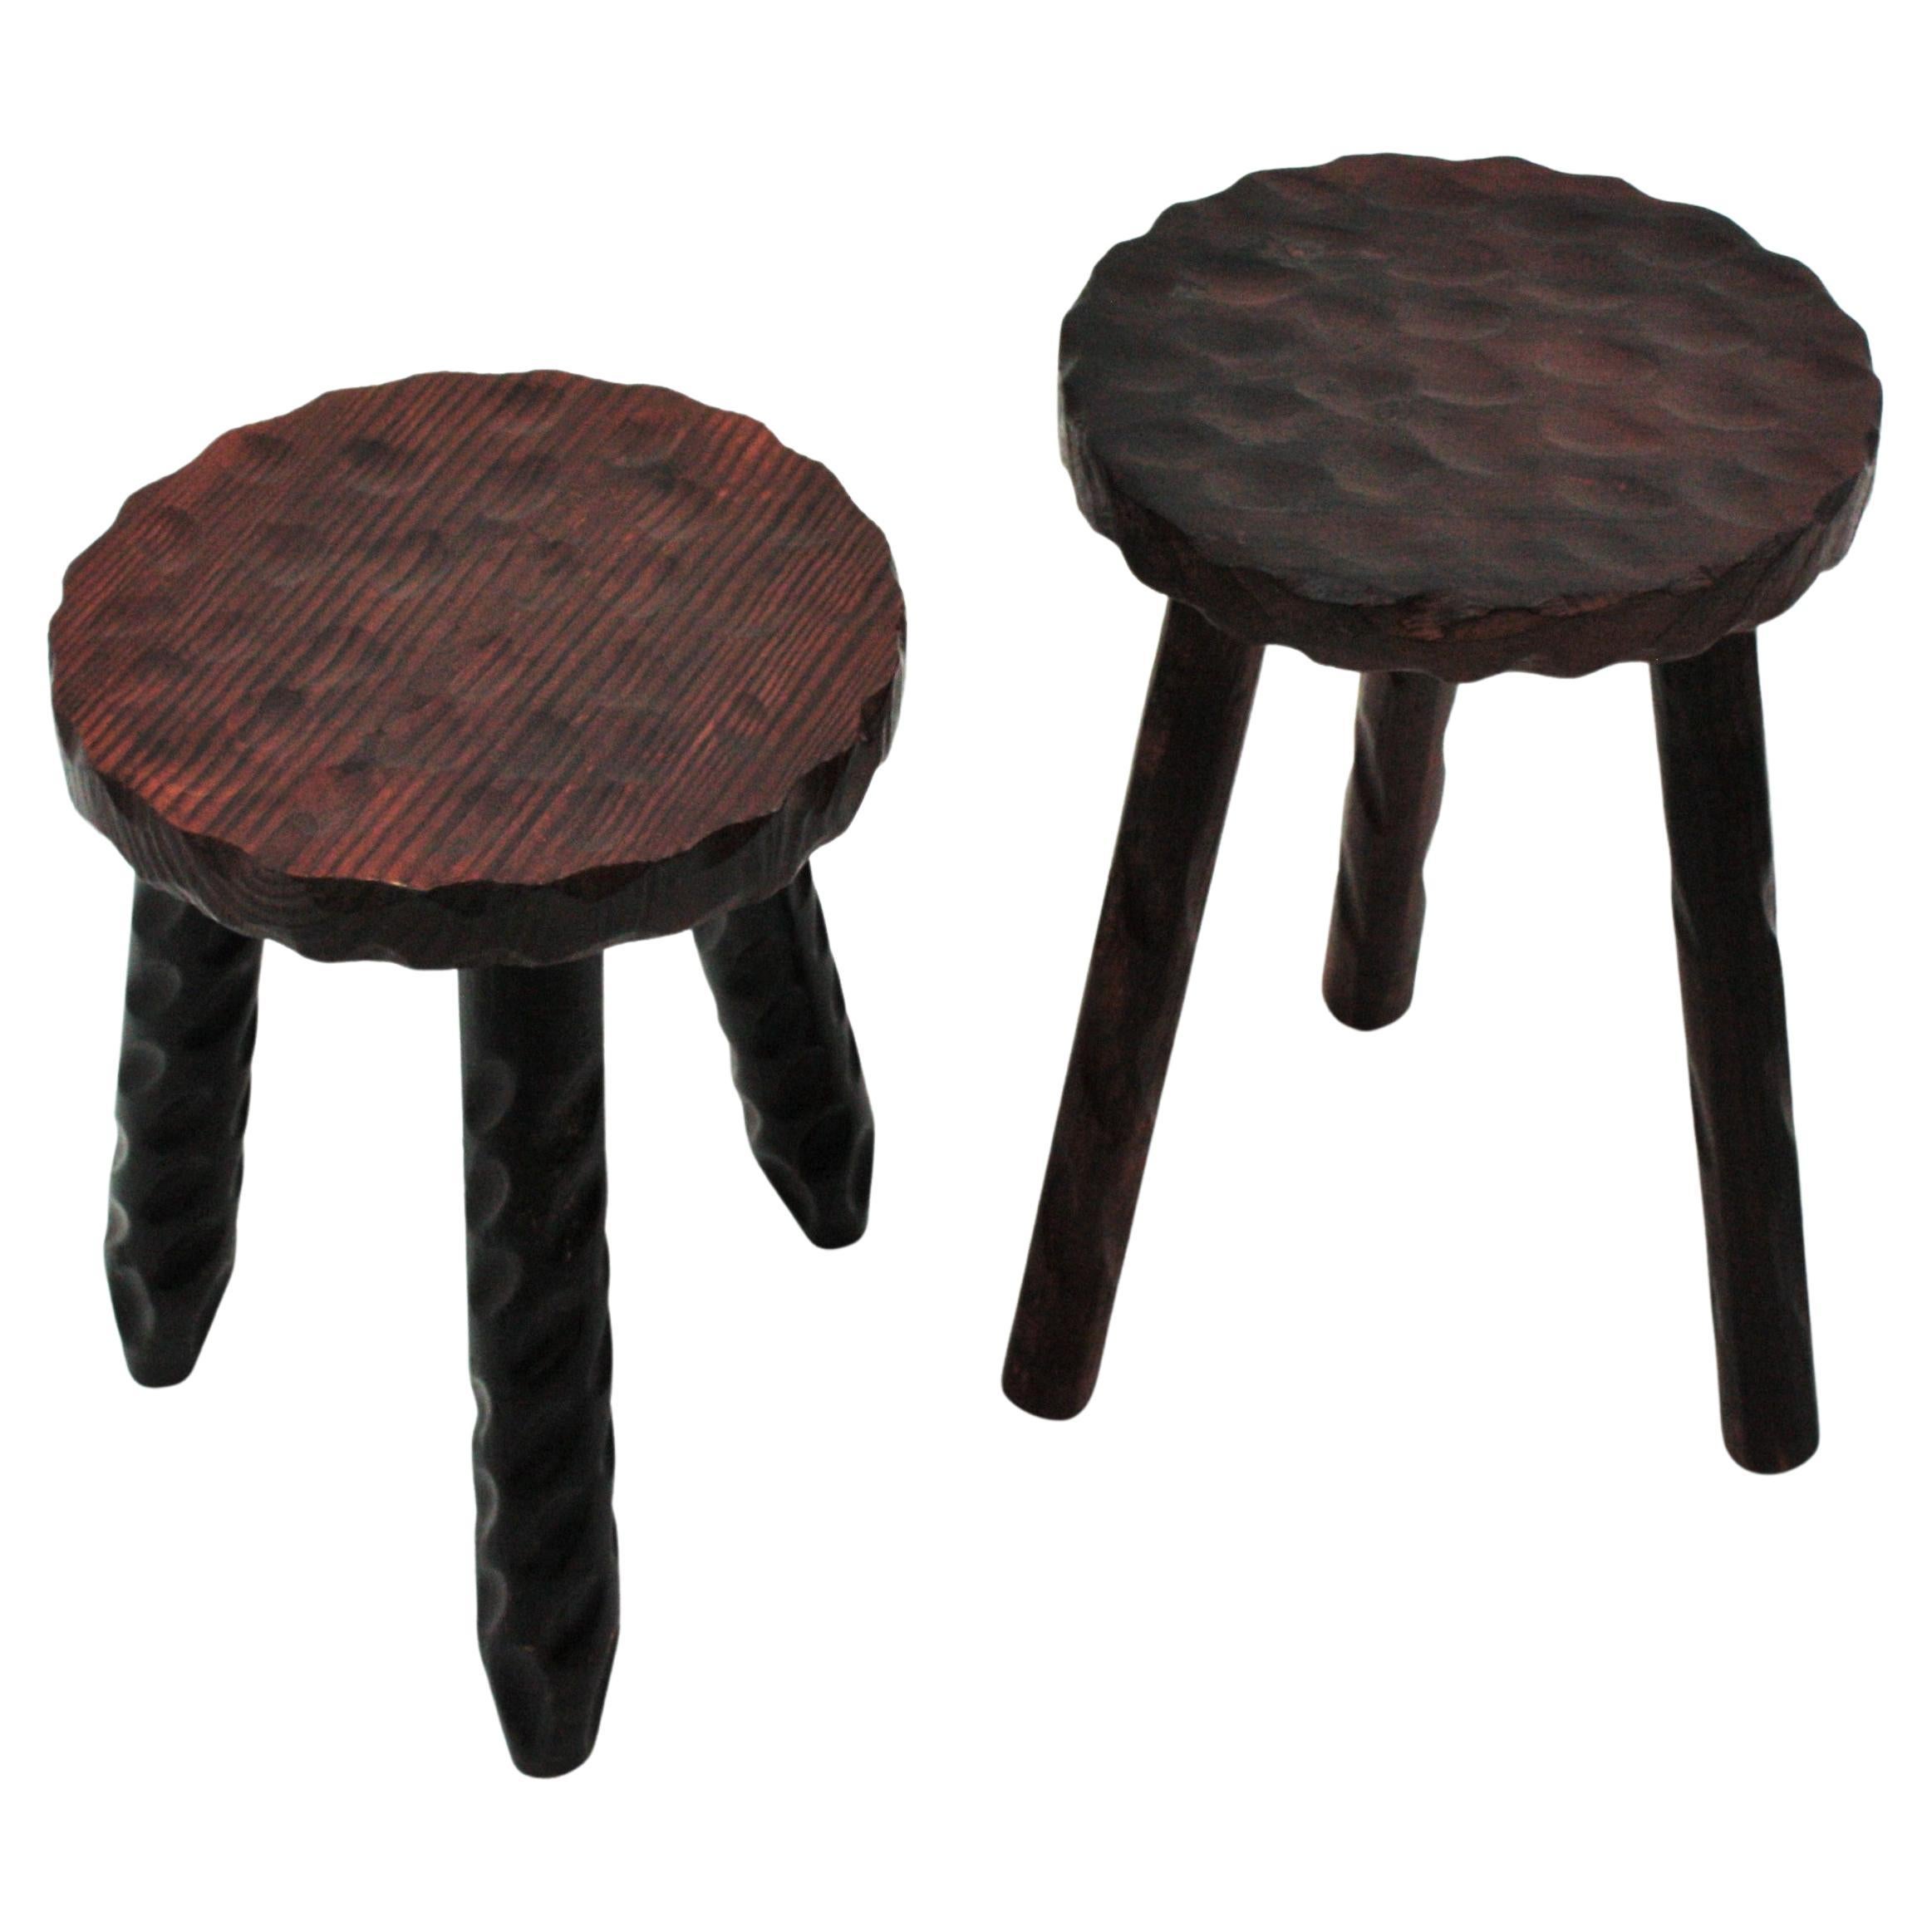 Pair of Spanish Colonial Tripod Stools in Carved Wood, 1940s For Sale